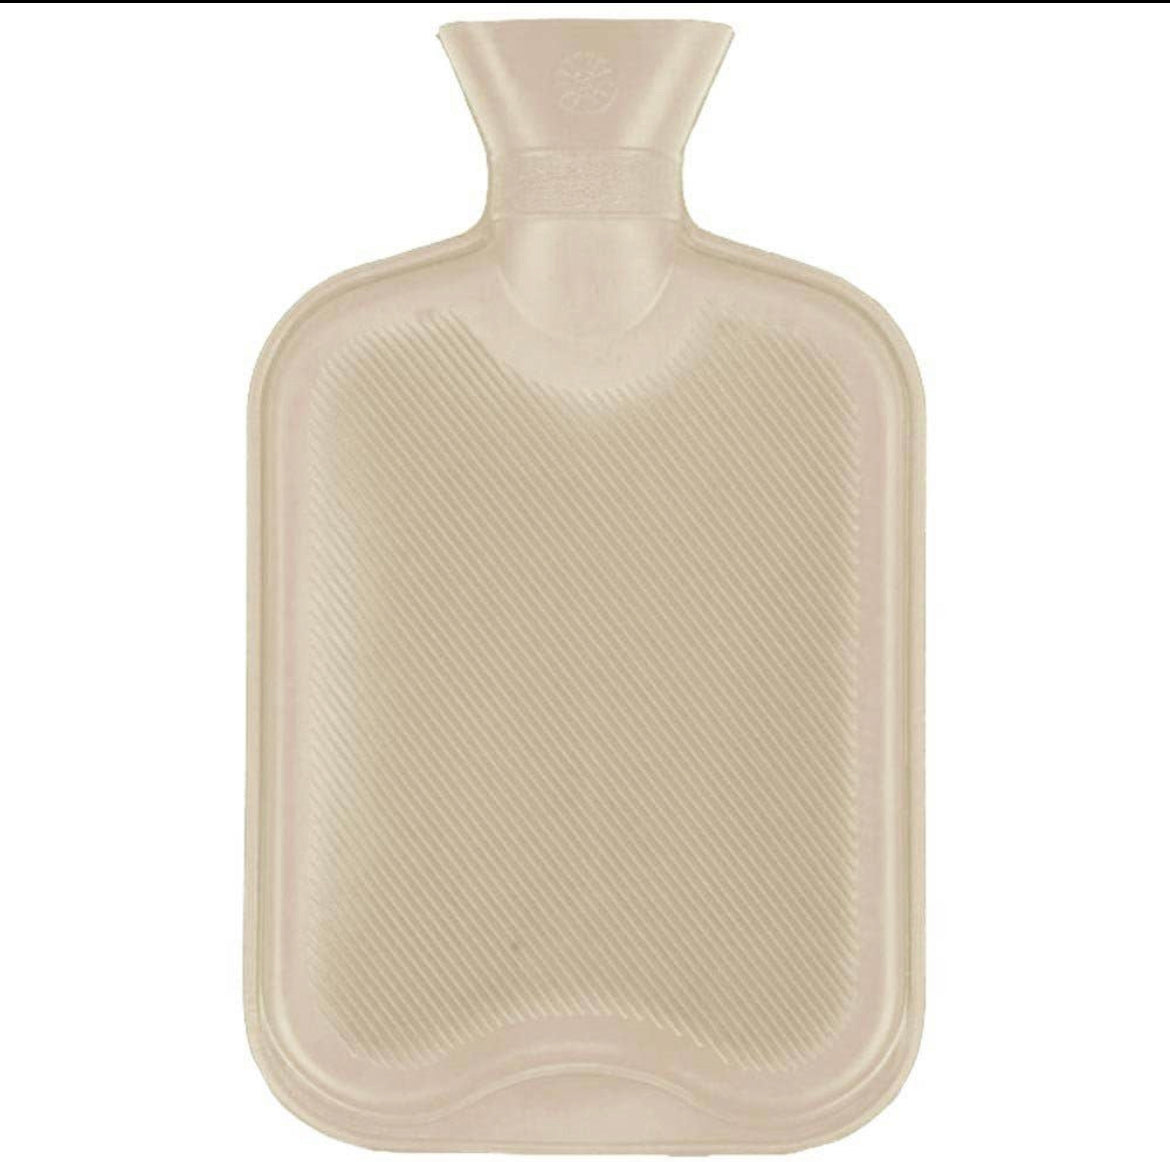 Hot/cold water bottle